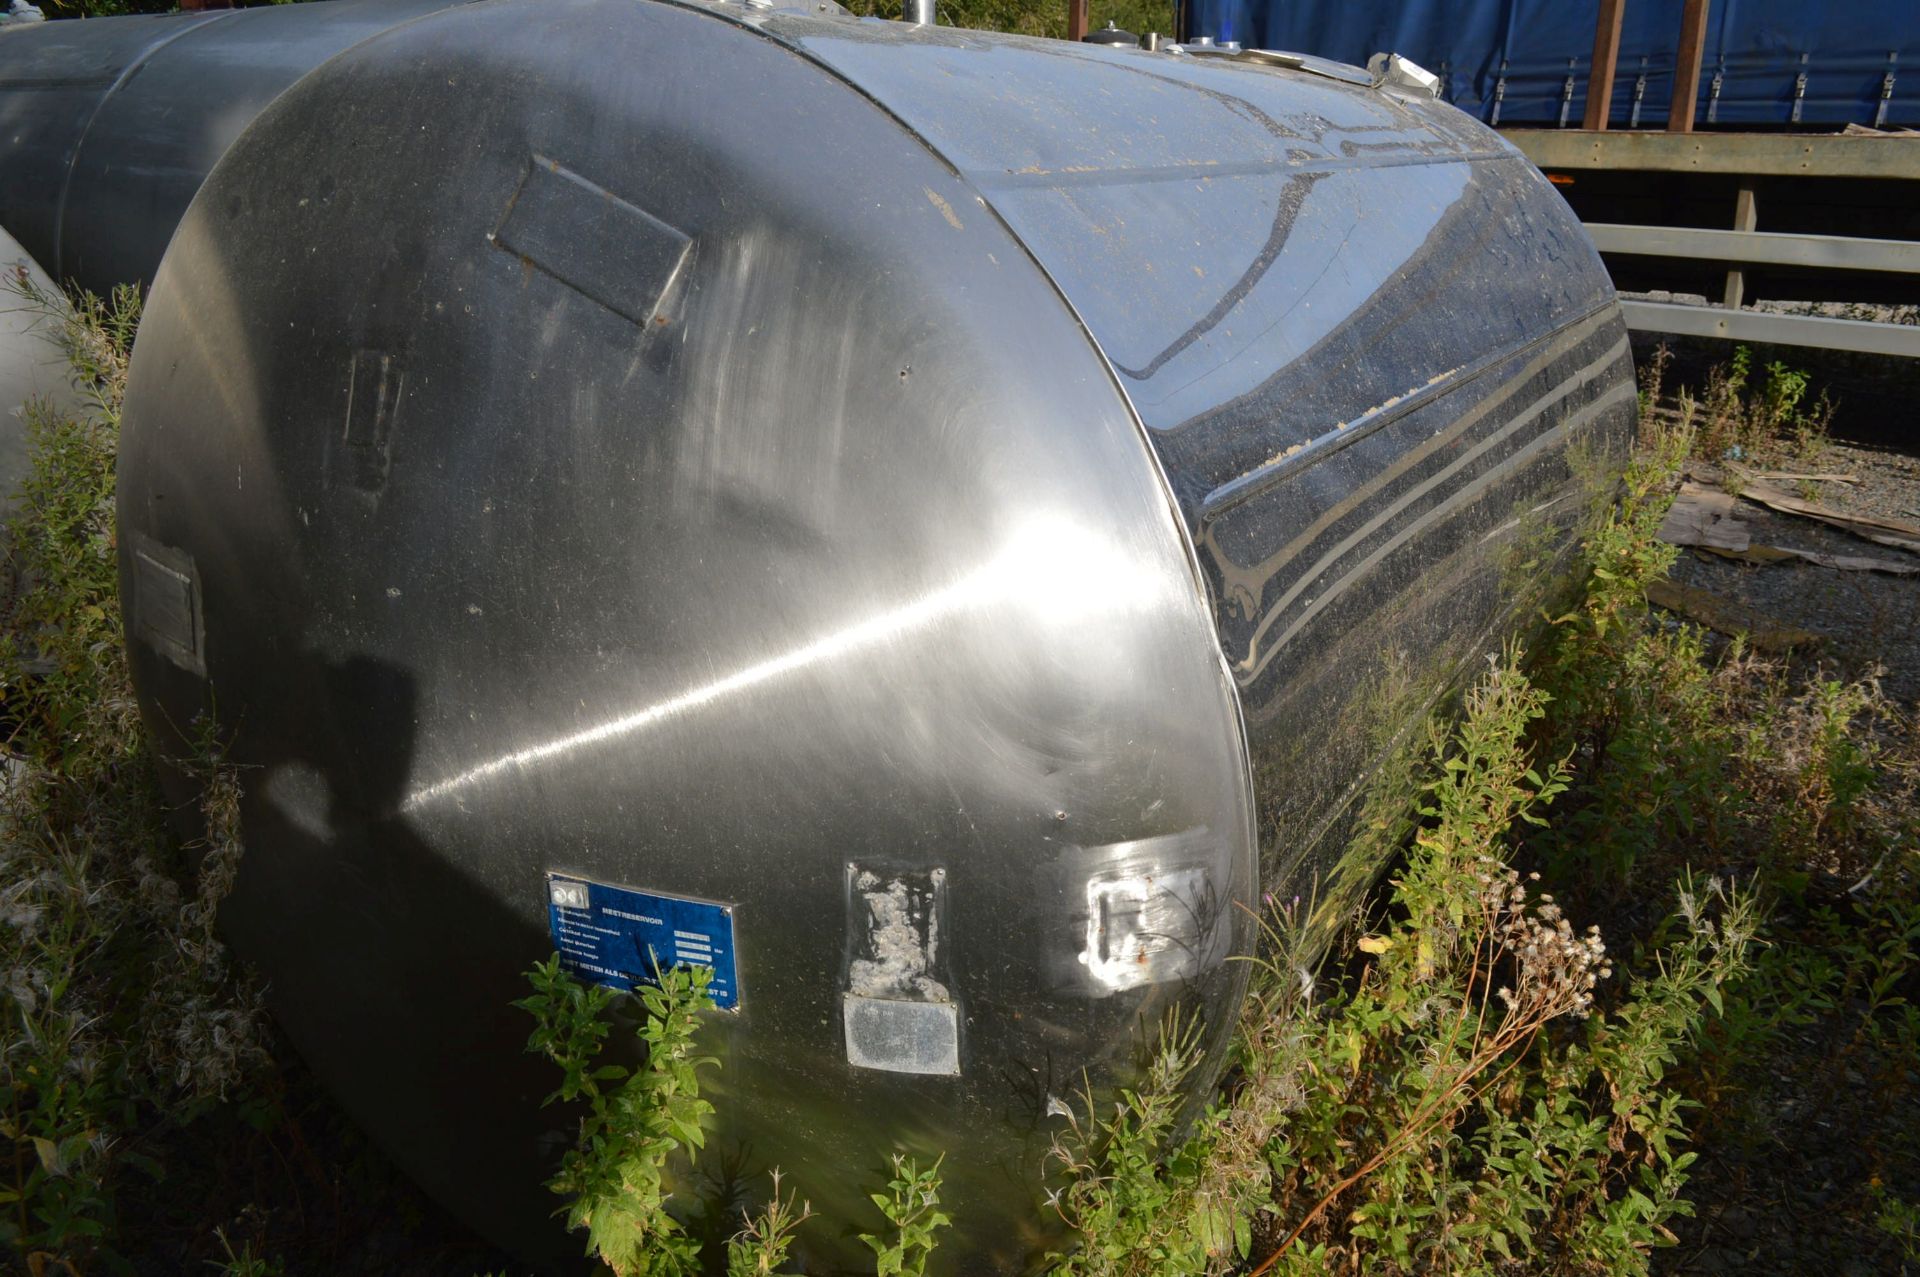 STAINLESS STEEL HORIZONAL STORAGE TANK, serial no. 39-5-04, approx. 1.3m dia. x 2m long, with - Image 2 of 4